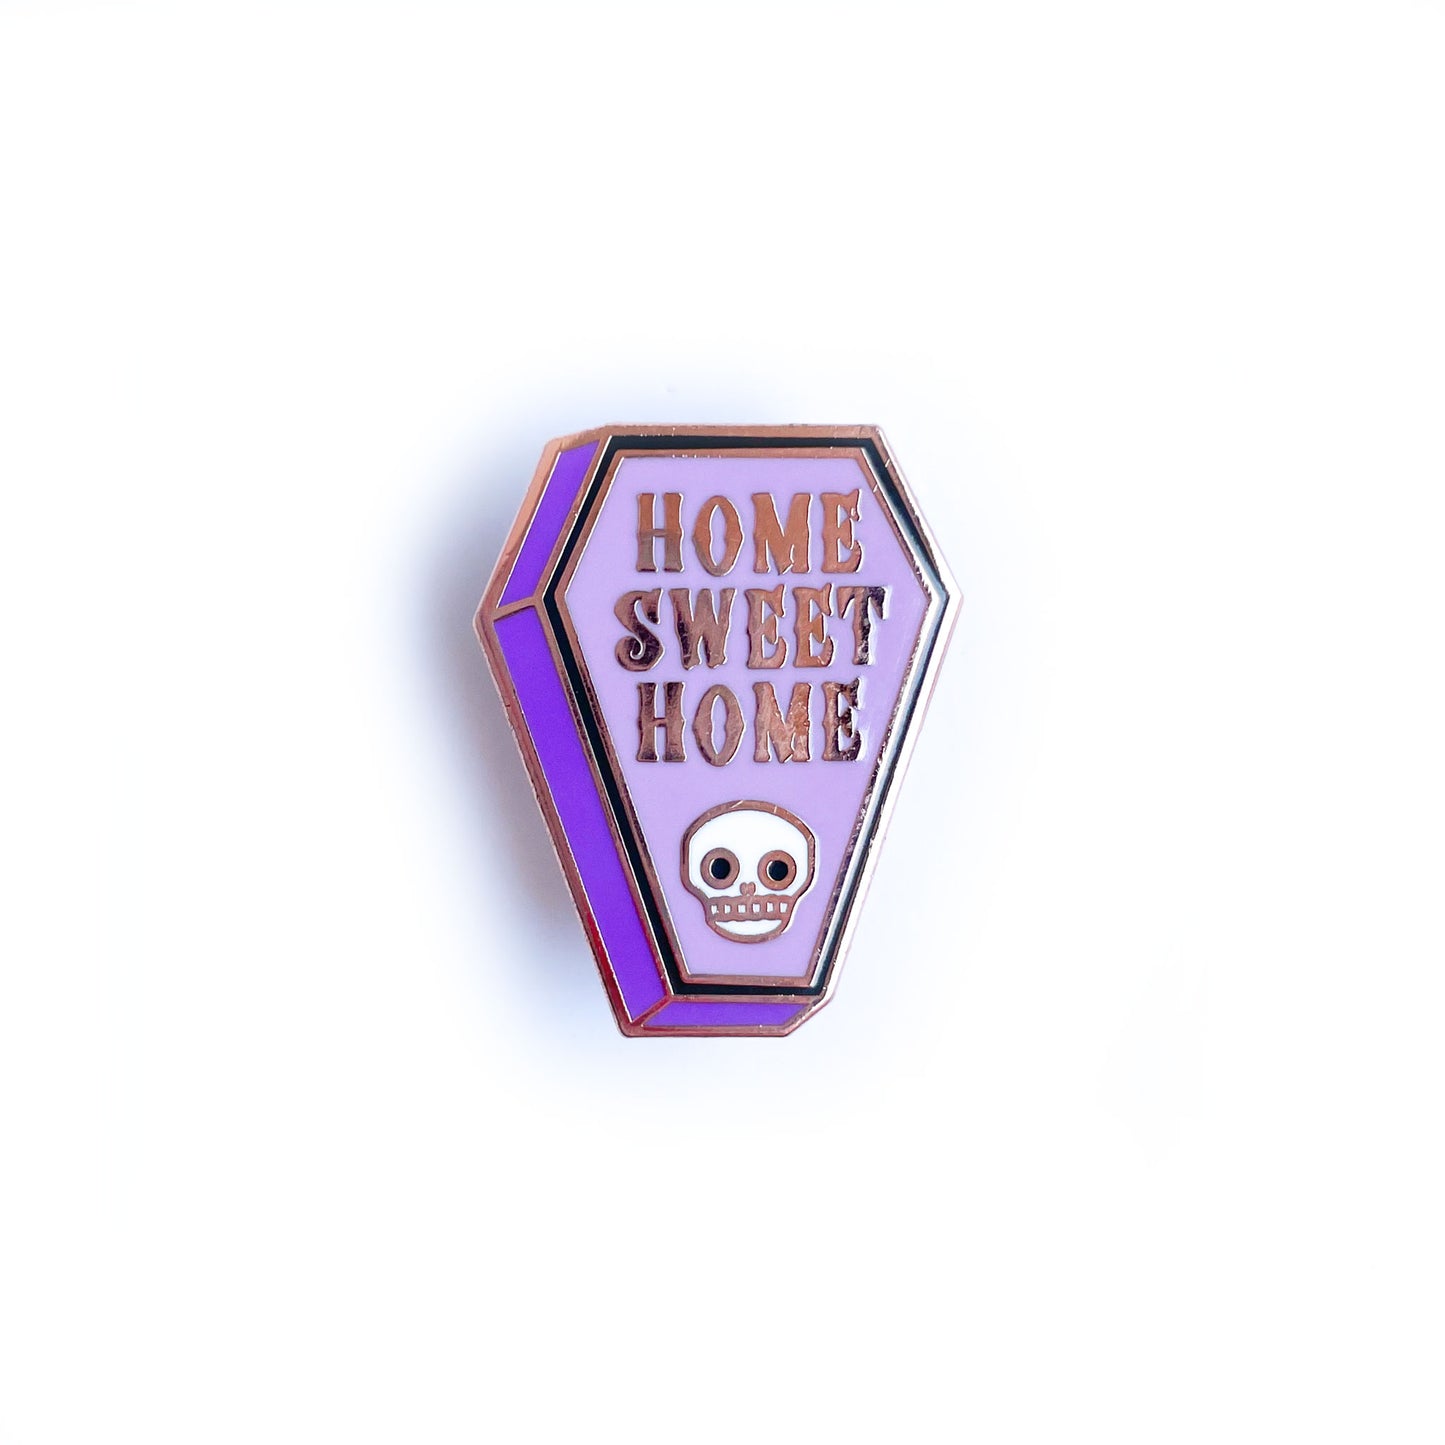 A coffin shaped enamel pin with the words "Home Sweet Home" on it and a skull.